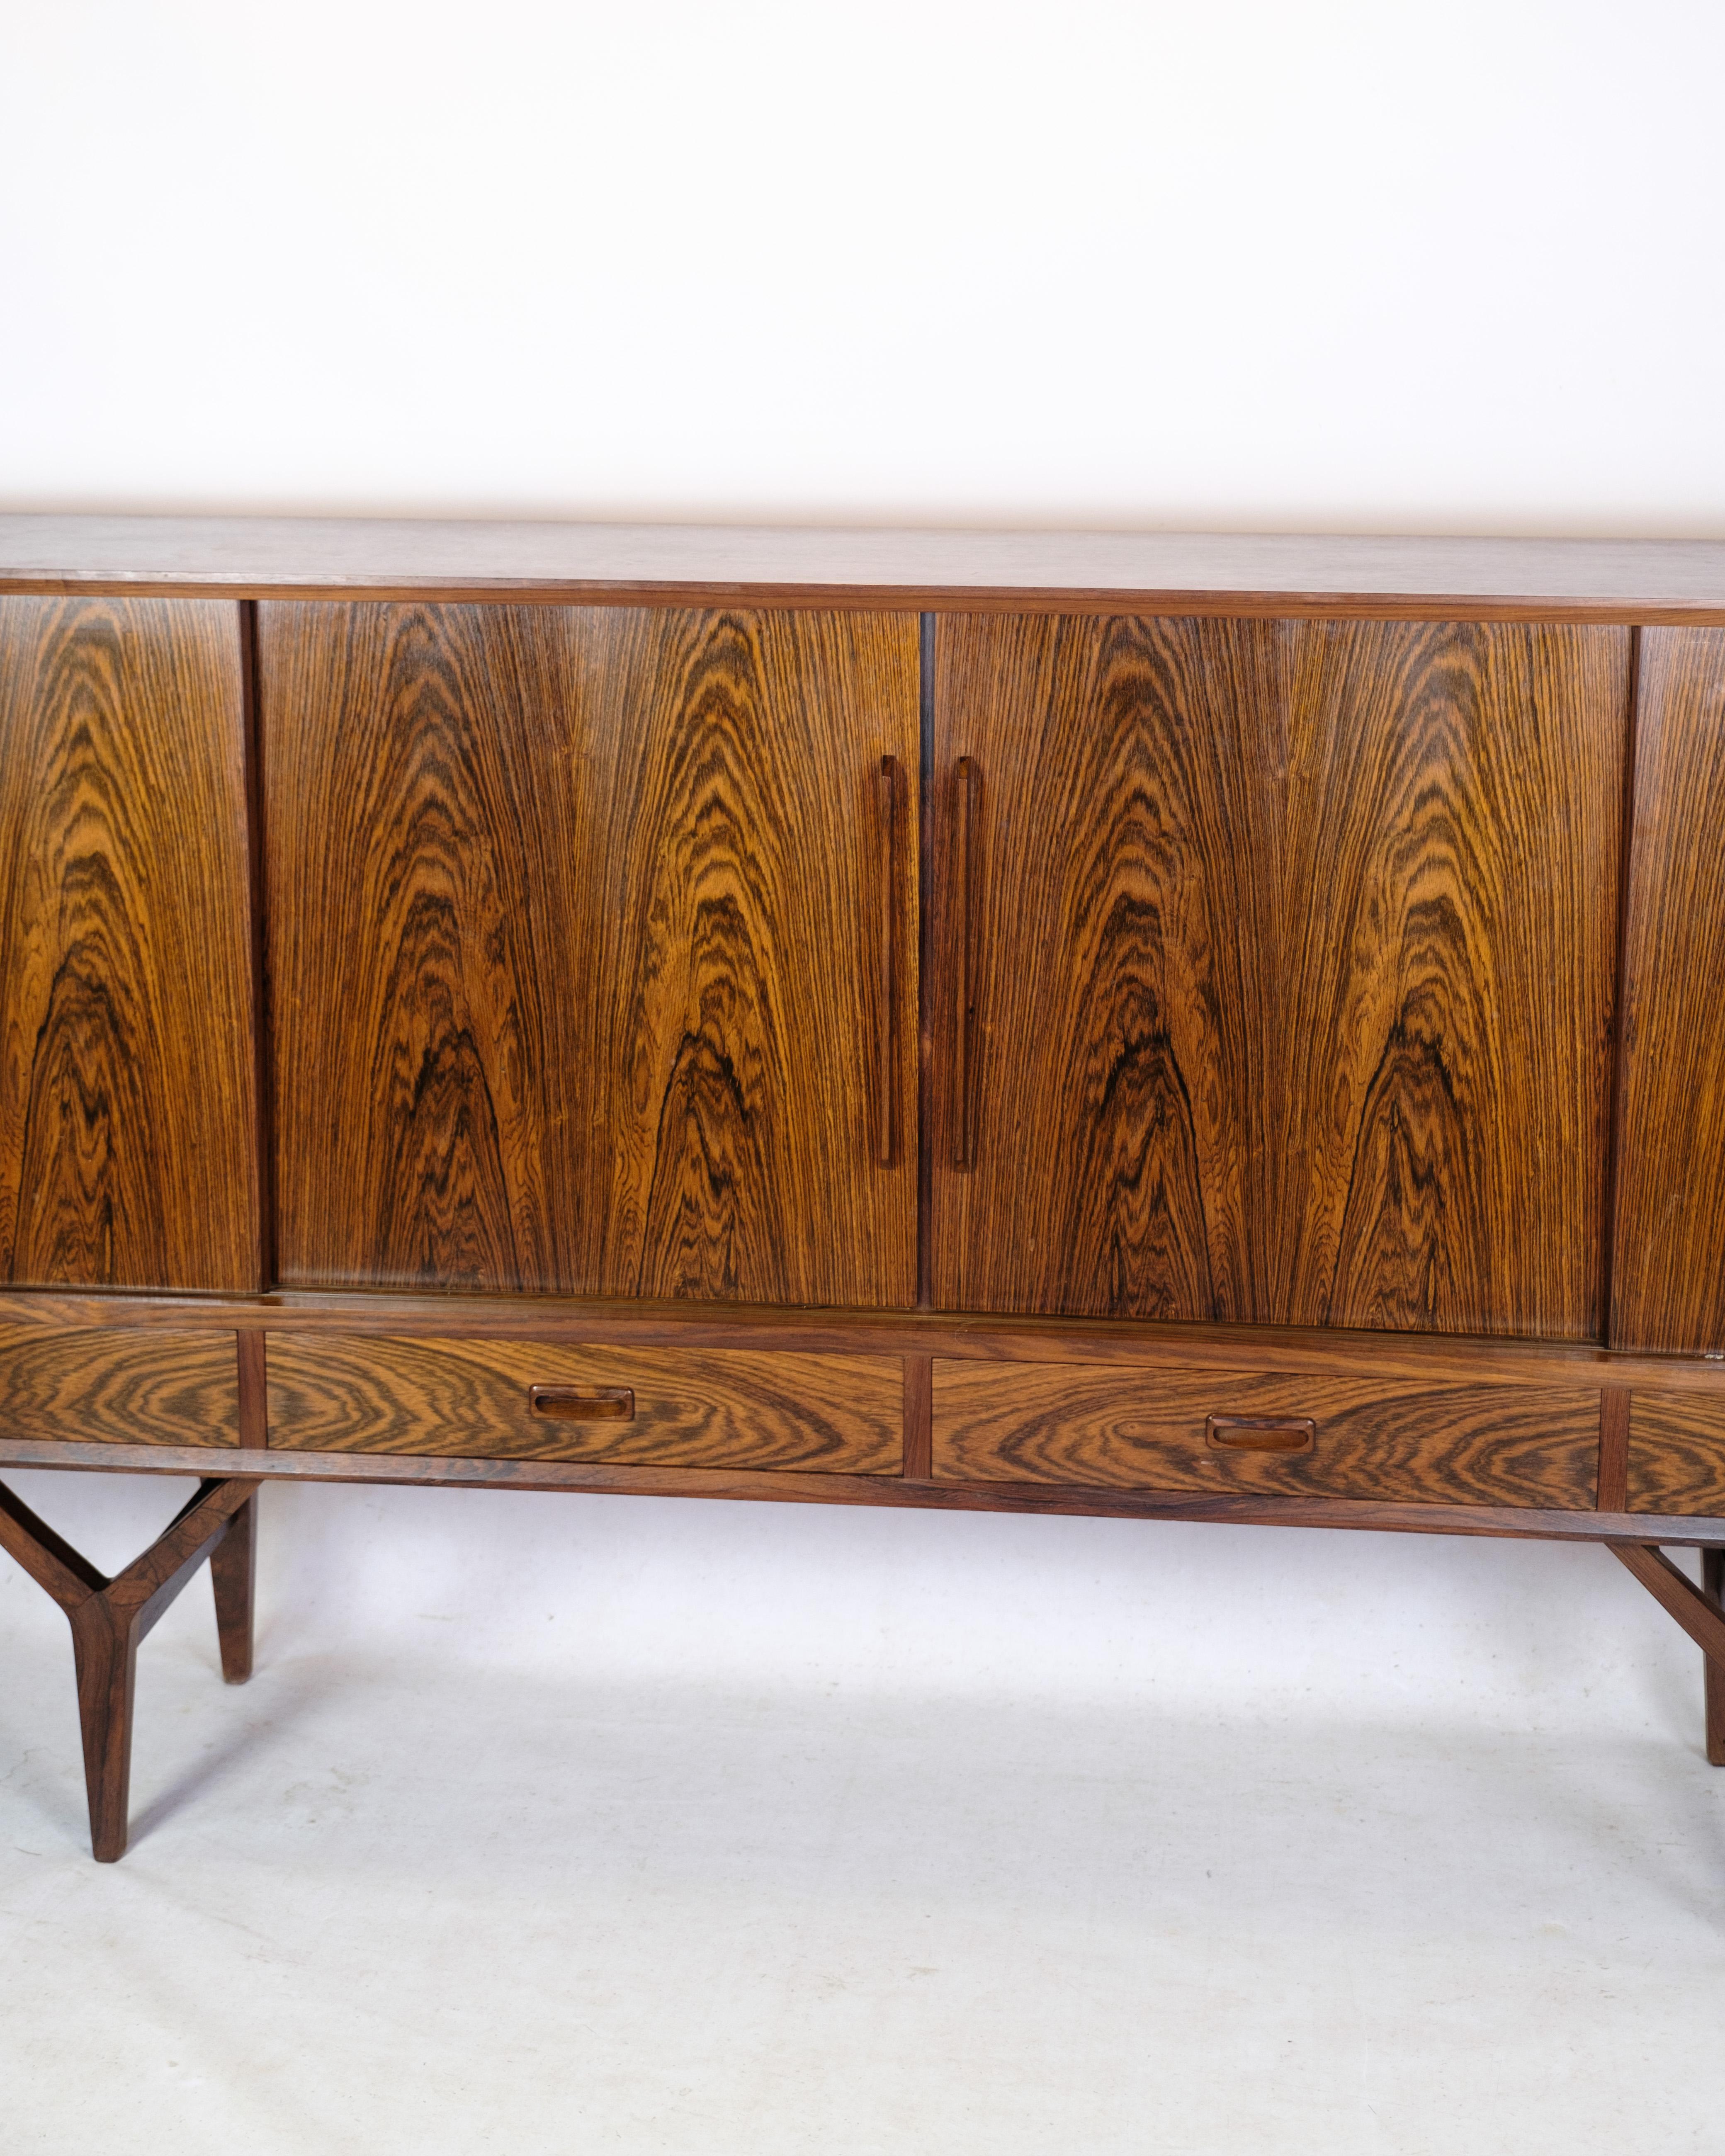 Sideboard in rosewood of Danish design with 4 sliding doors and 4 drawers from around the 1960s.
Measurements in cm: H:109 W:220 D:43.5